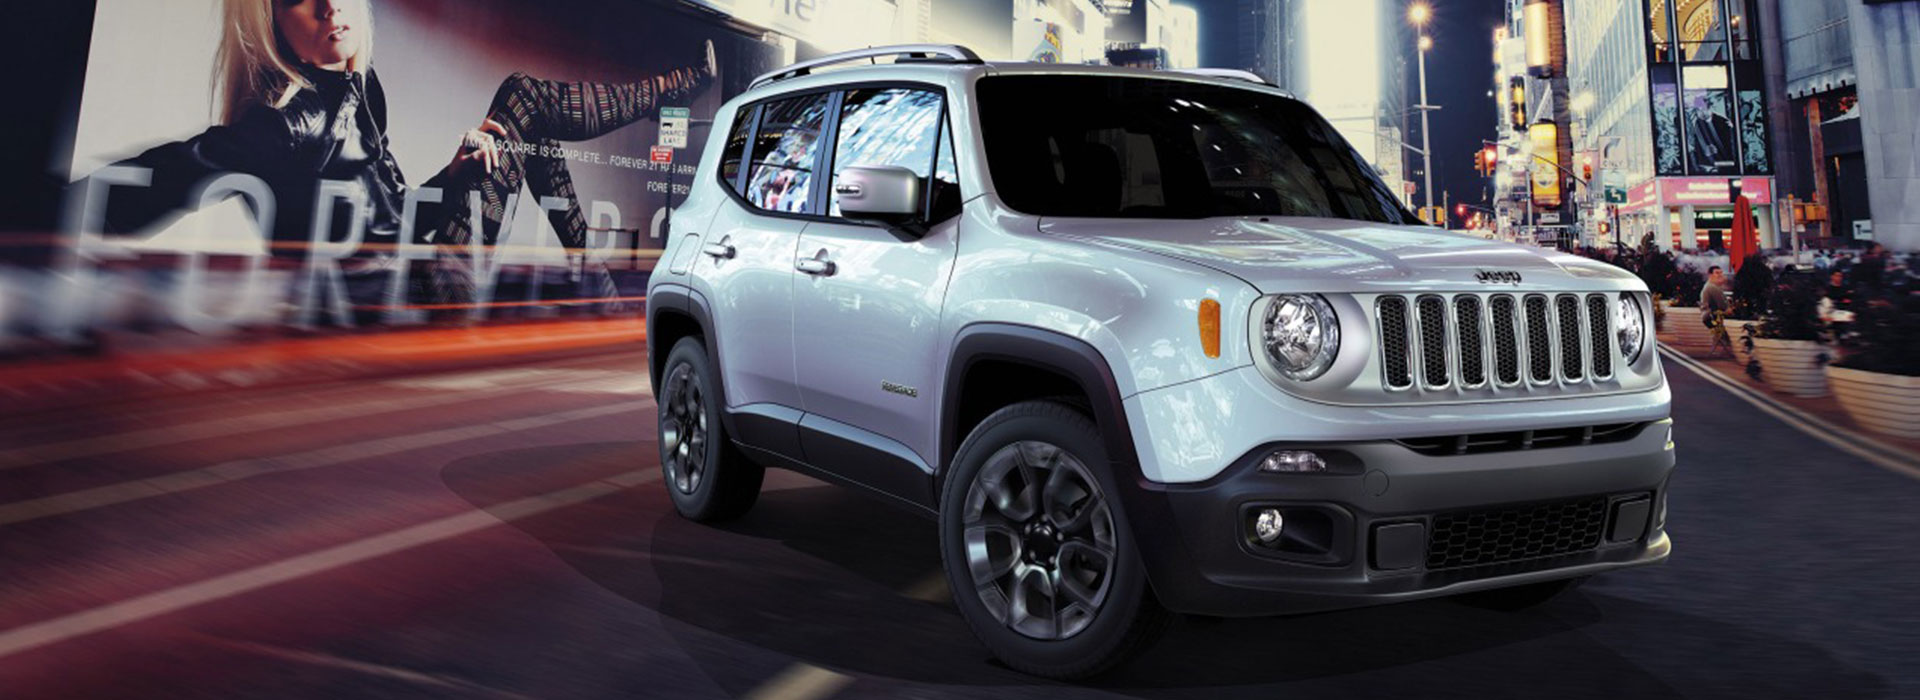 jeep-renegade-banner